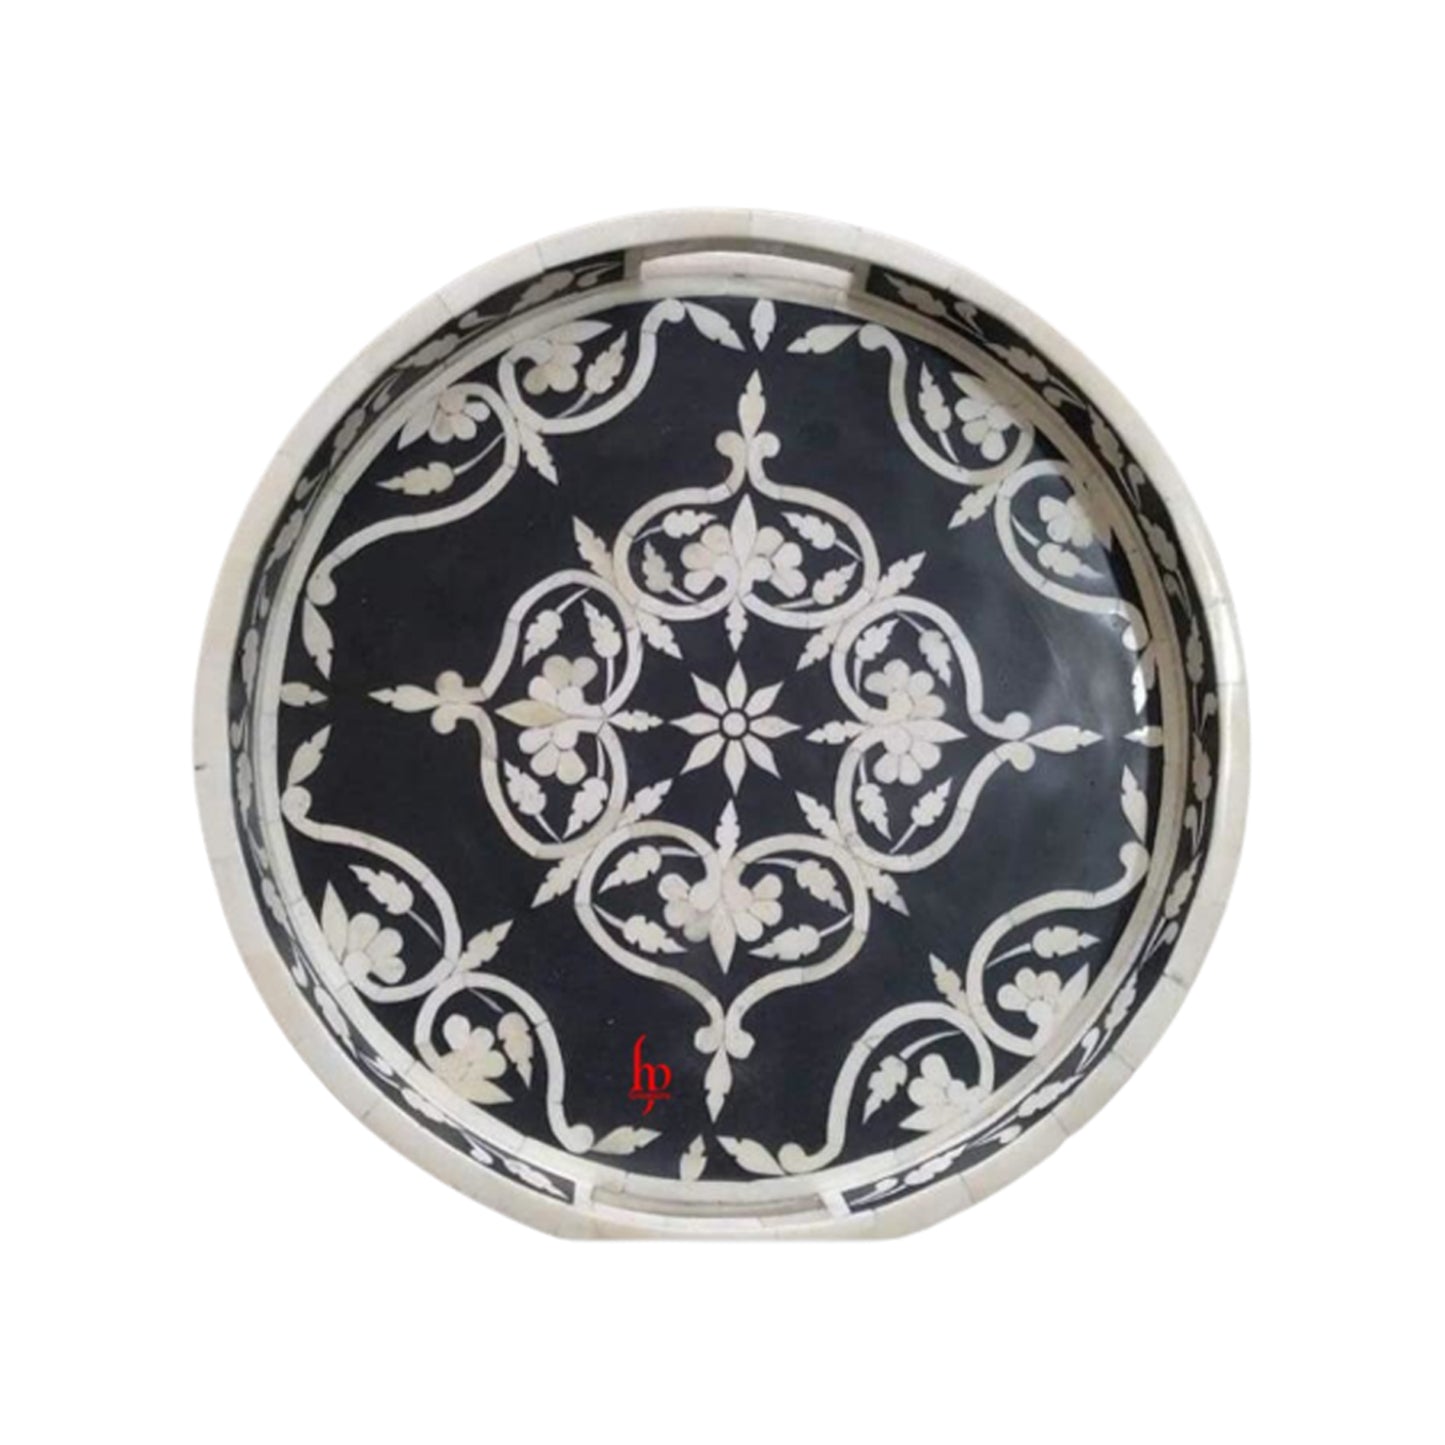 Beautifully Handcrafted Bone Inlay Decorative Serving Tray a Perfect Gift For Any Occasion